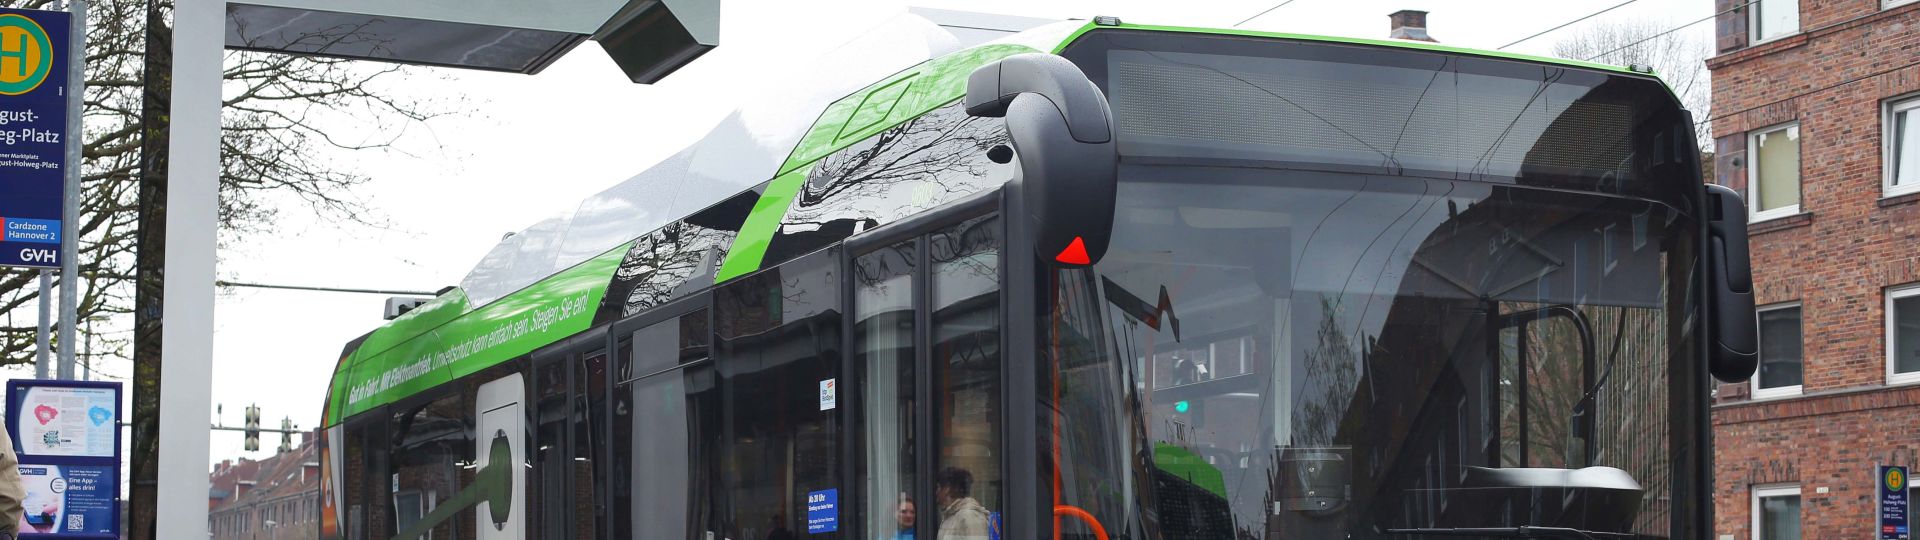 Electric Solaris buses to open up an electromobility era in Hanover